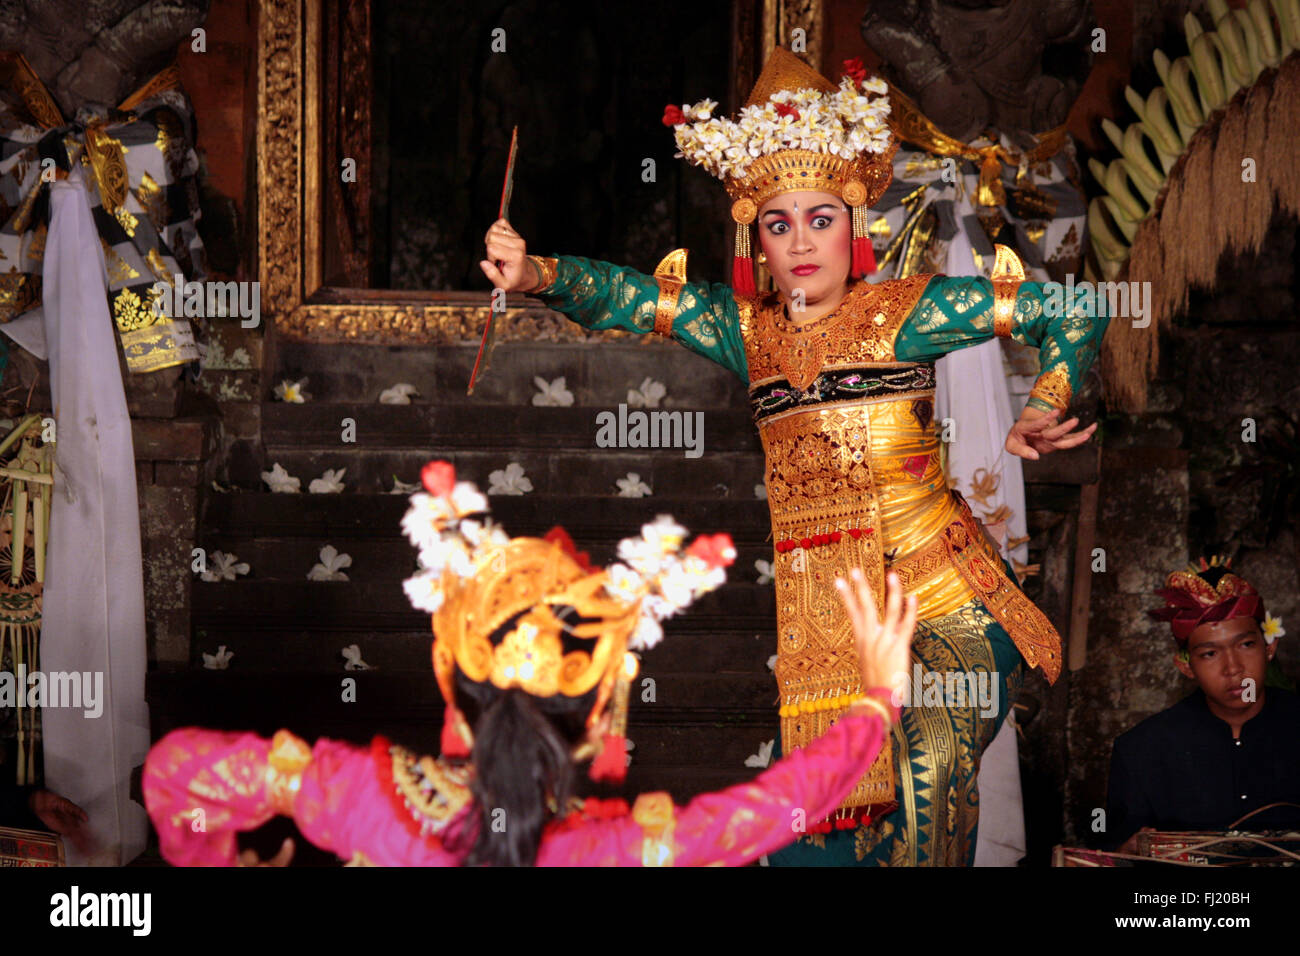 A barong dance performance at outdoor theater at night in Ubud, Bali, Indonesia Stock Photo